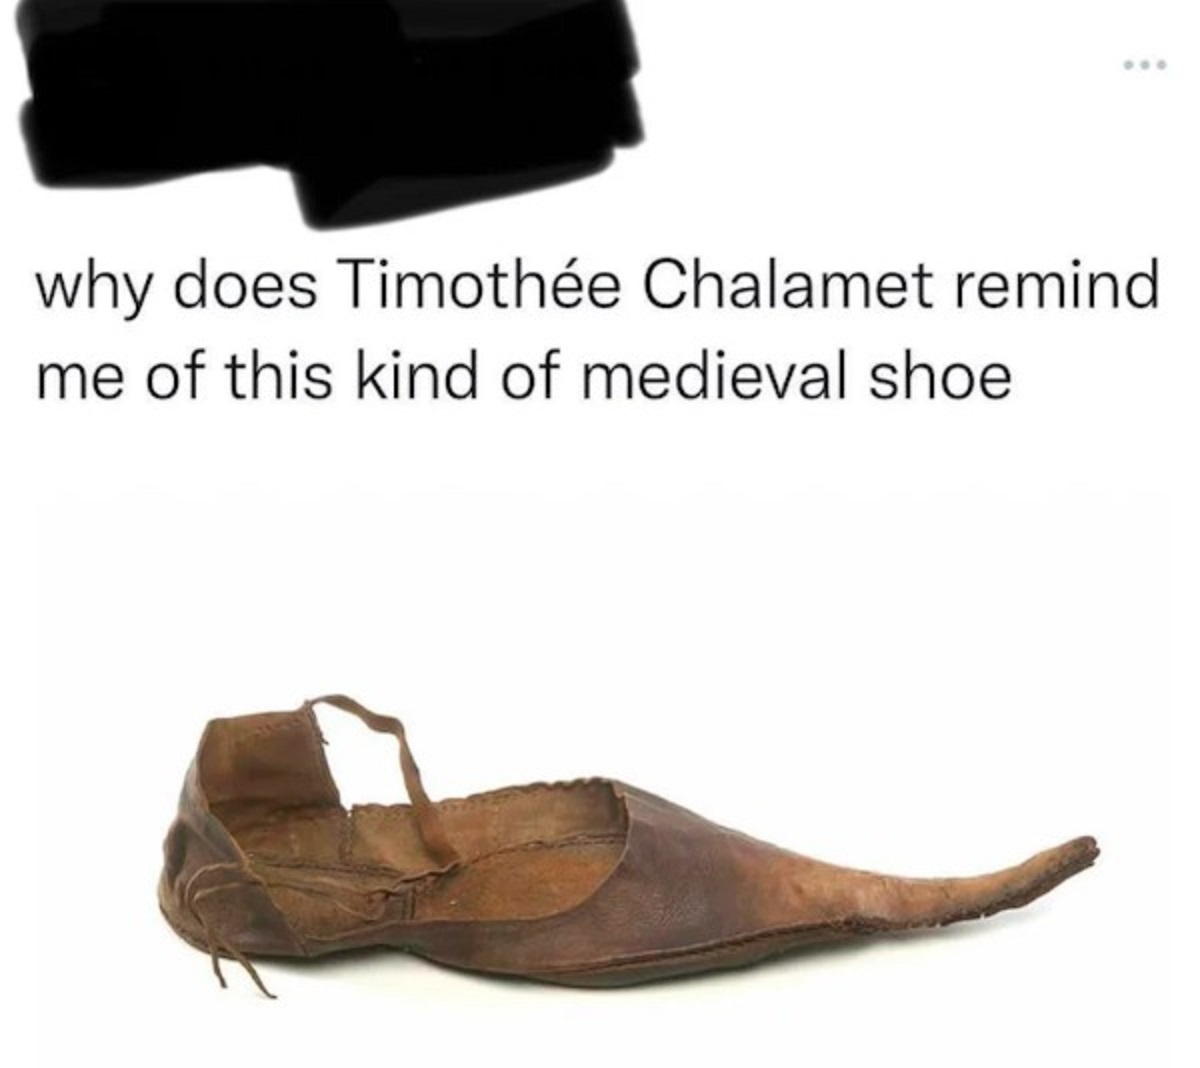 shoe reminds me of timothee chalamet - why does Timothe Chalamet remind me of this kind of medieval shoe